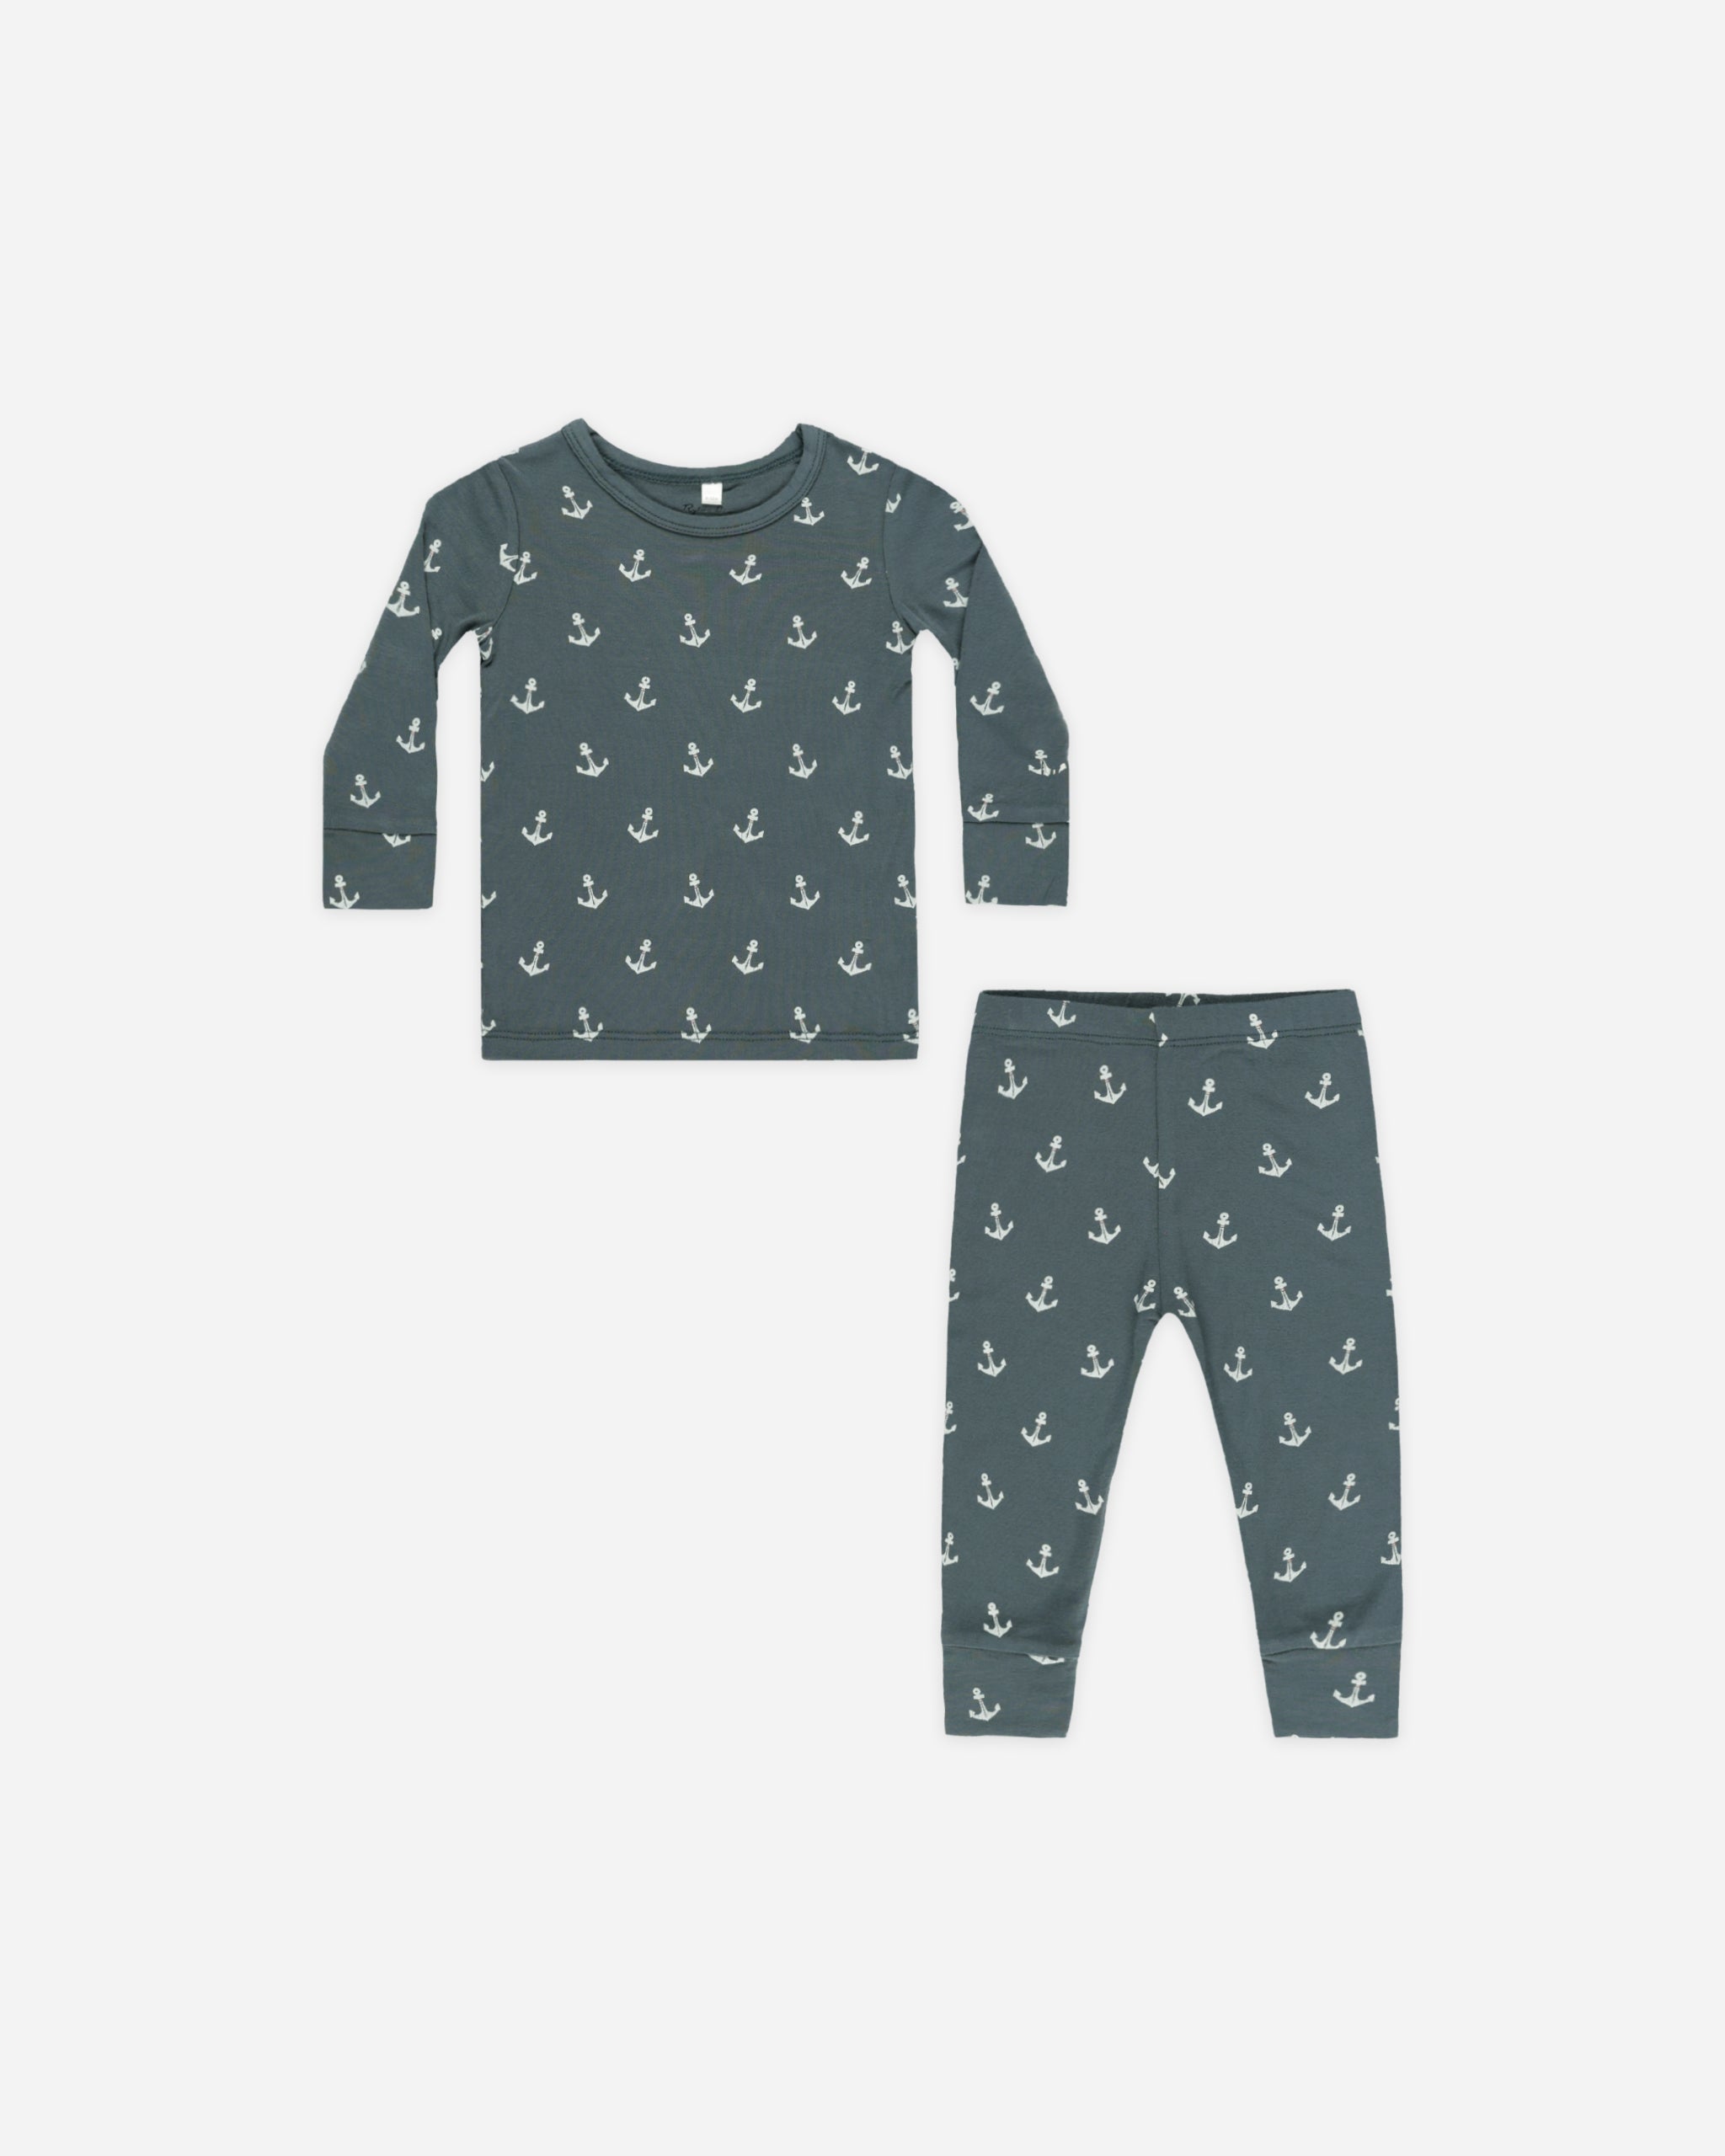 Long Sleeve Pajamas || Anchors - Rylee + Cru | Kids Clothes | Trendy Baby Clothes | Modern Infant Outfits |